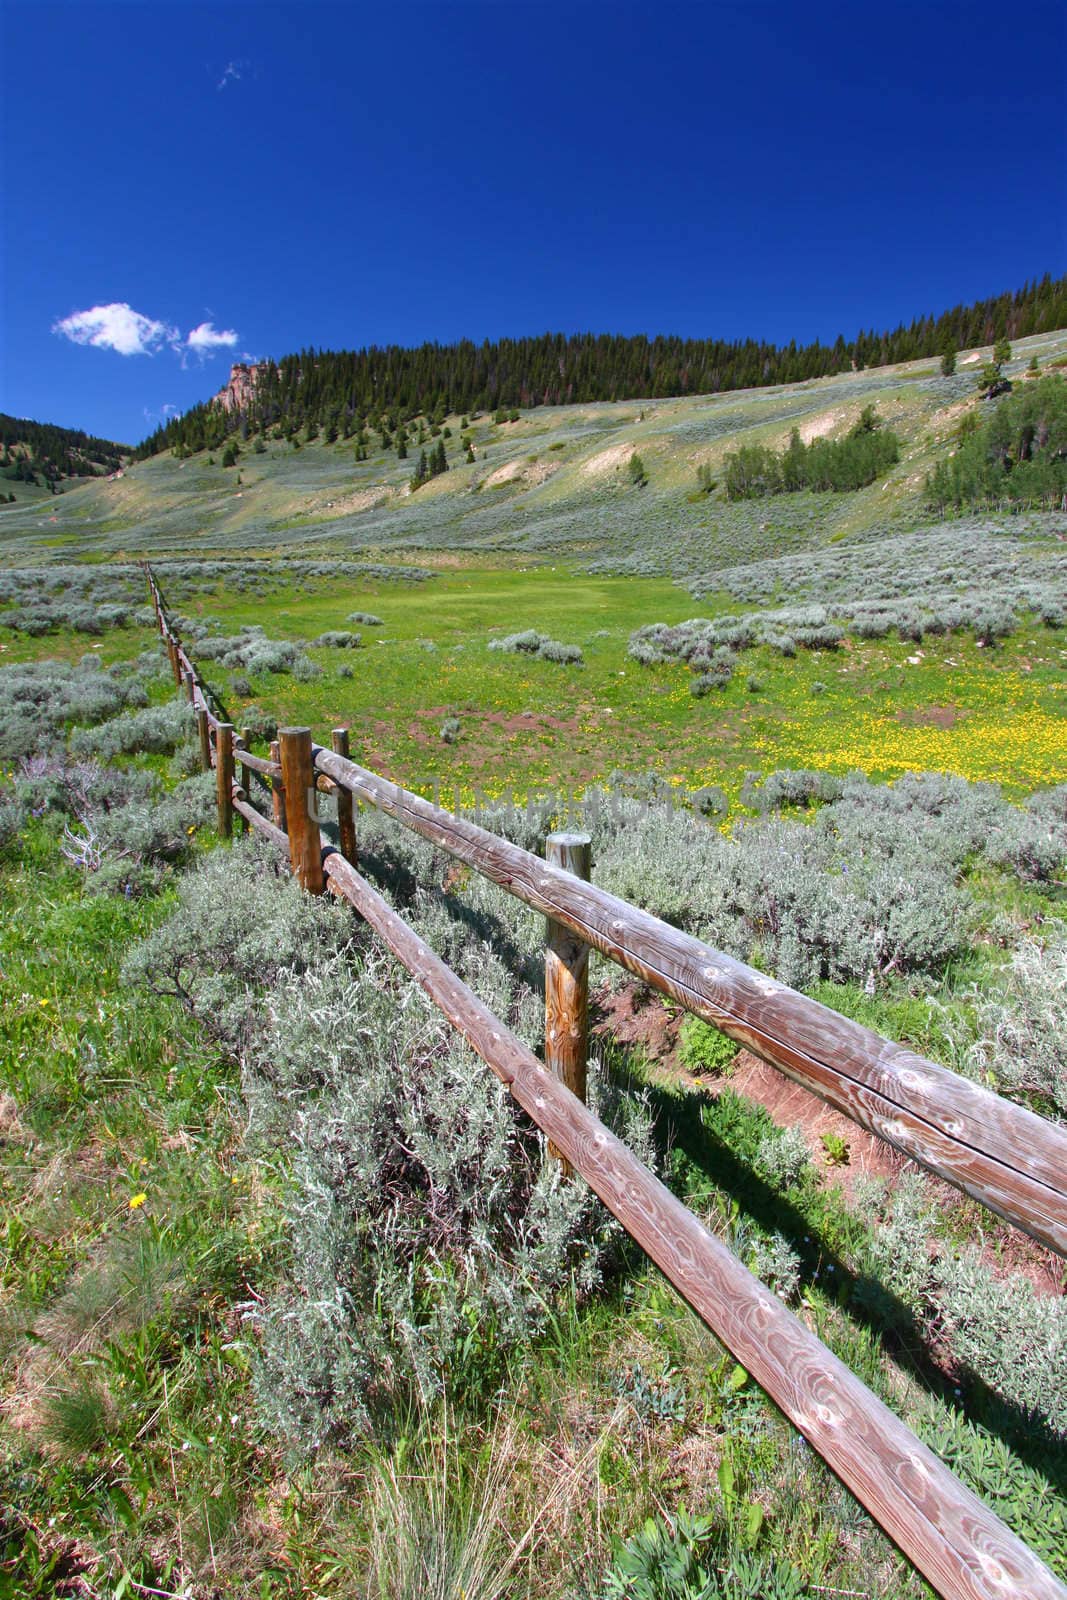 Wildflowers grow along a rustic fenceline in the Bighorn National Forest of Wyoming.